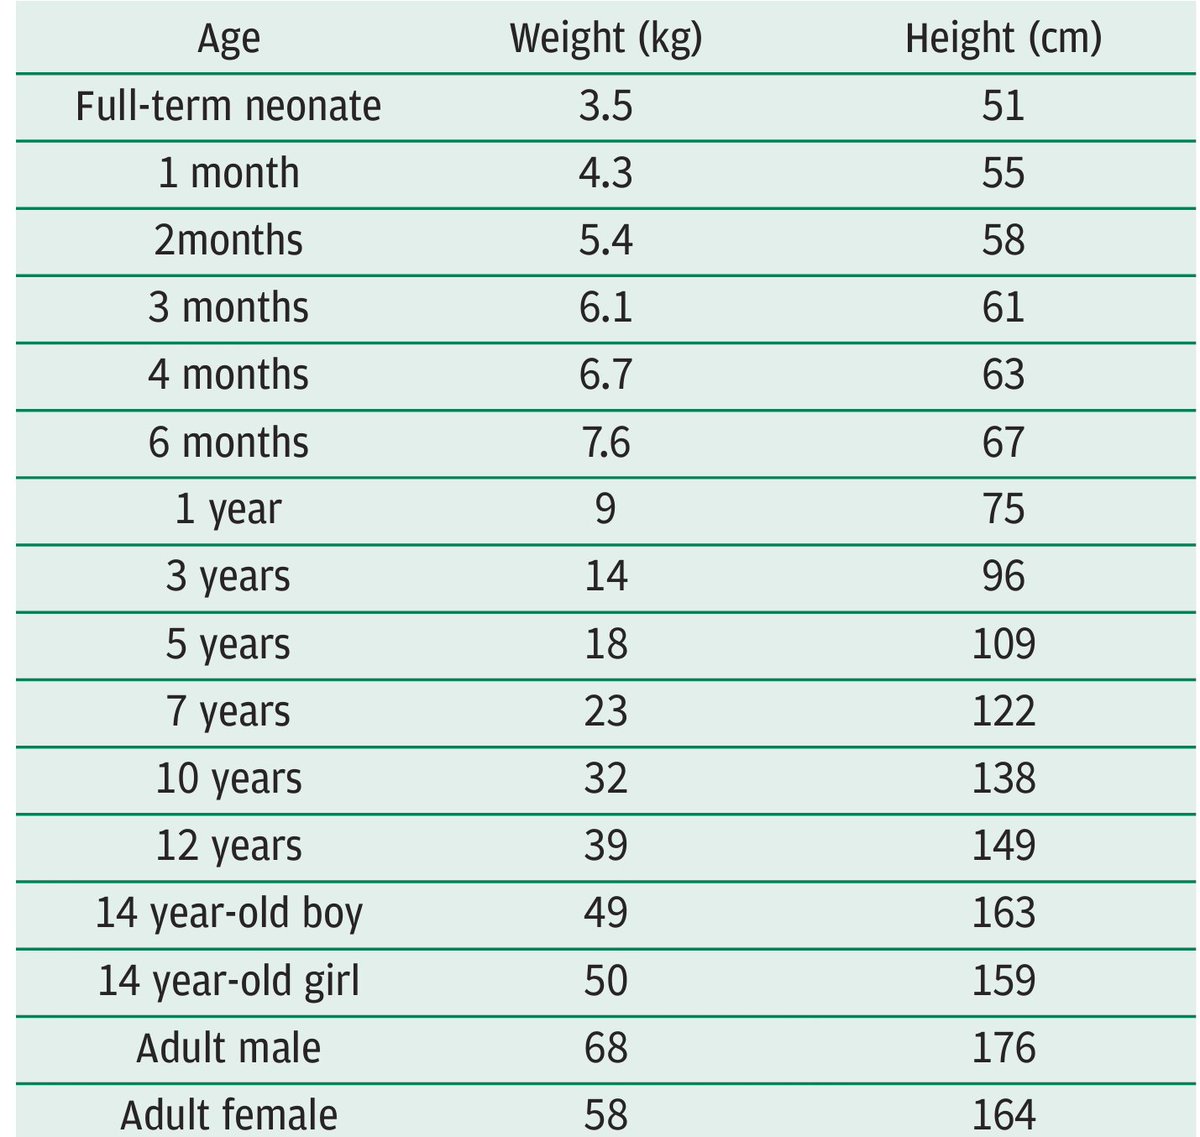 Average Weight Of 14 Year Old Boy